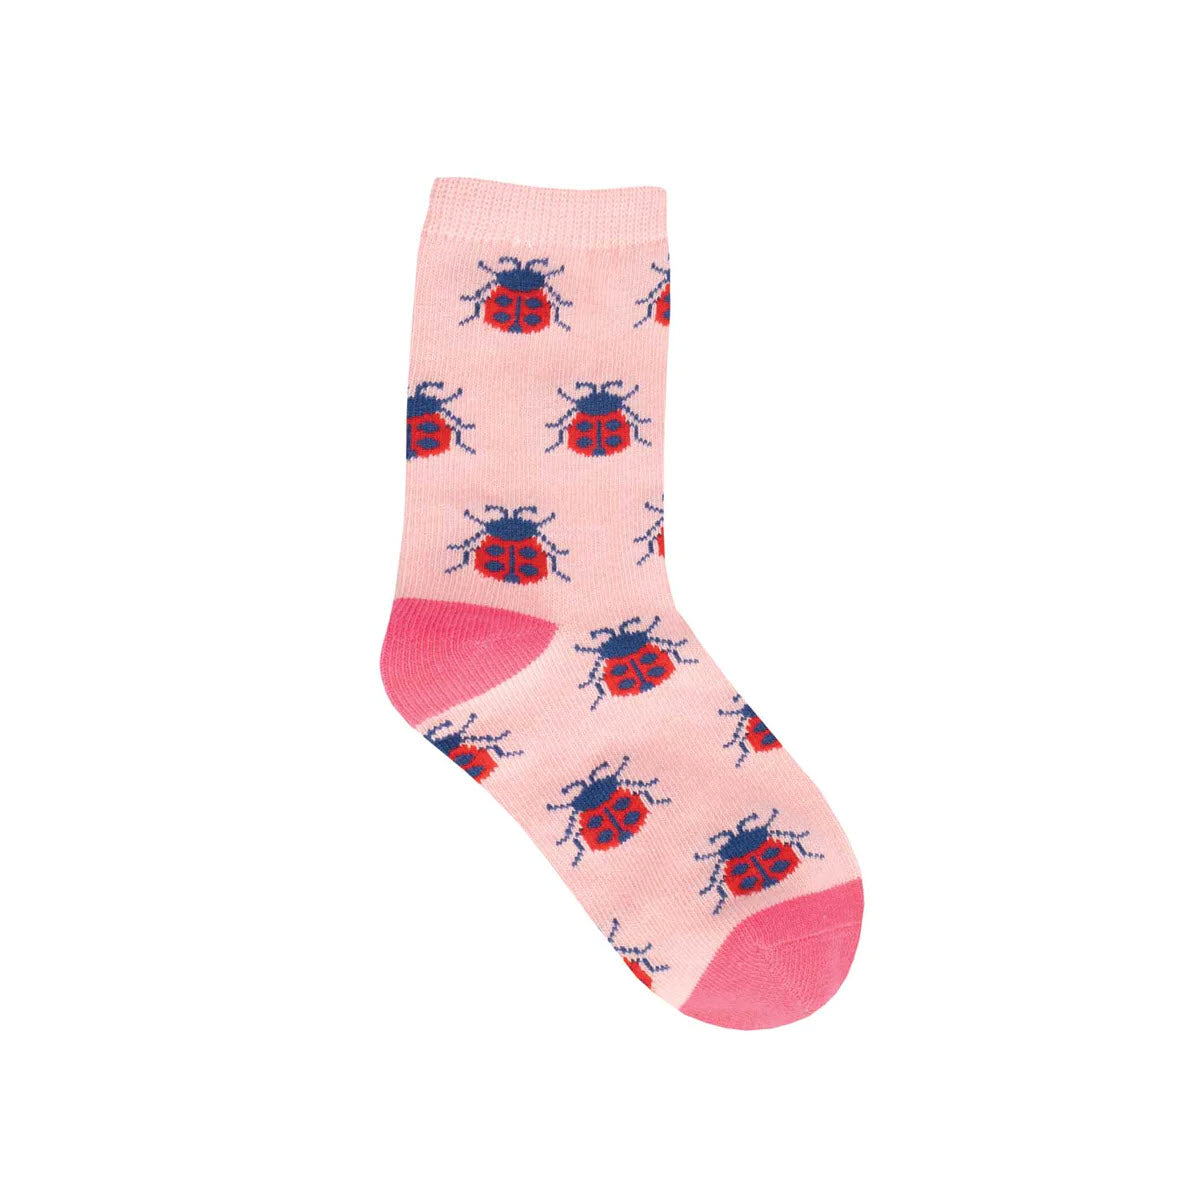 A single SOCKSMITH LADYBUG LOVE CREW SOCKS PINK - KIDS with a pattern of blue and red ladybugs, featuring a red toe and heel, isolated on a white background.